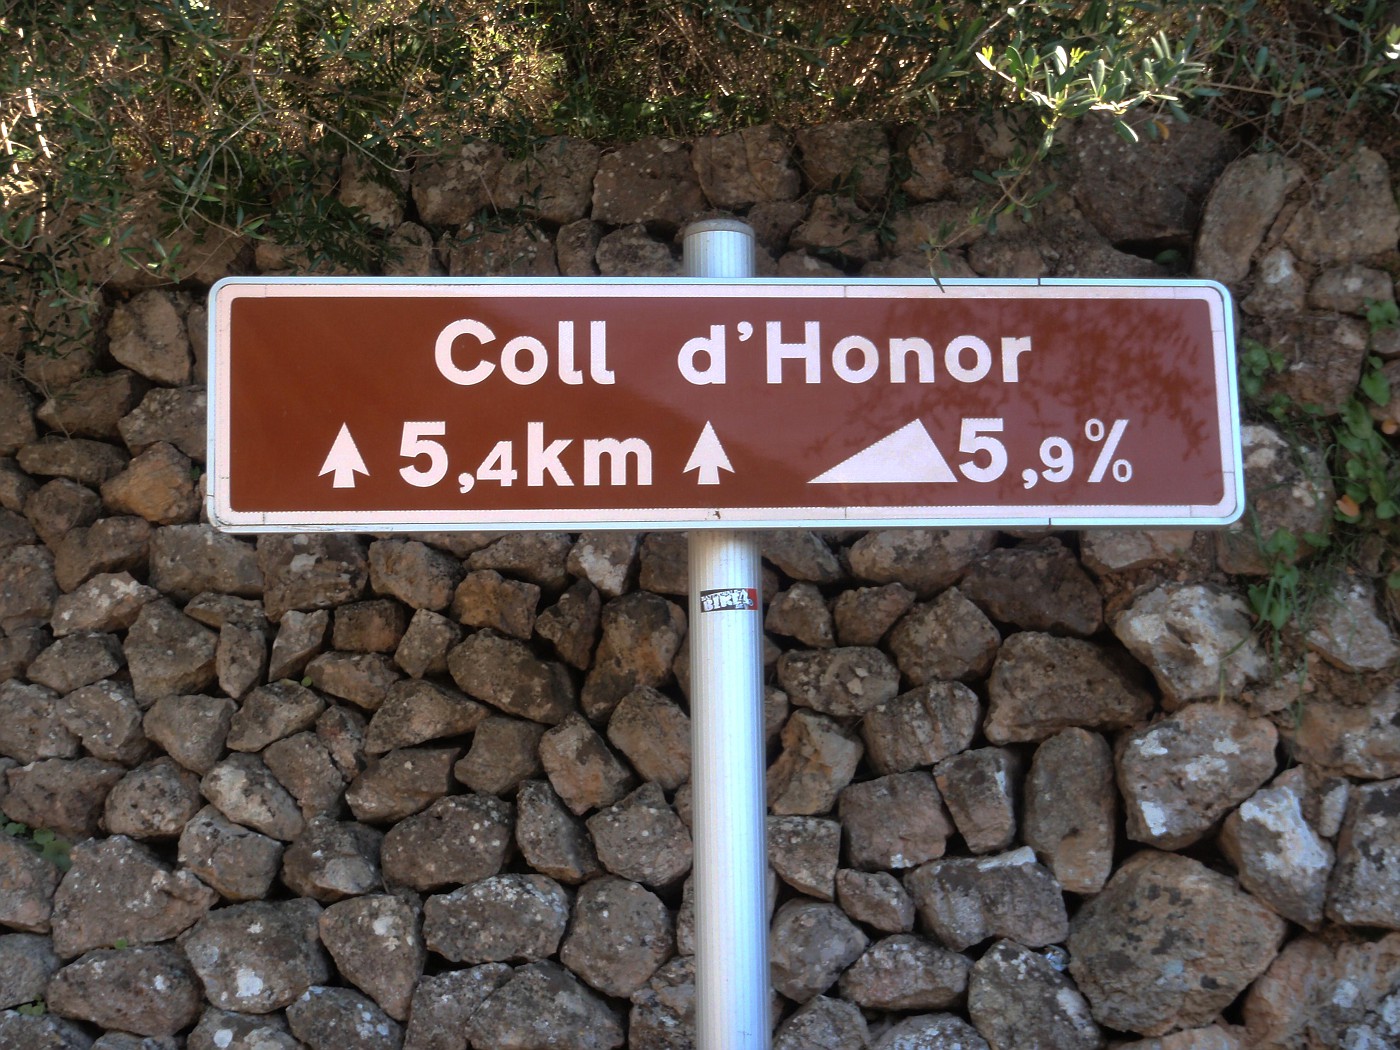 Coll d'Honor